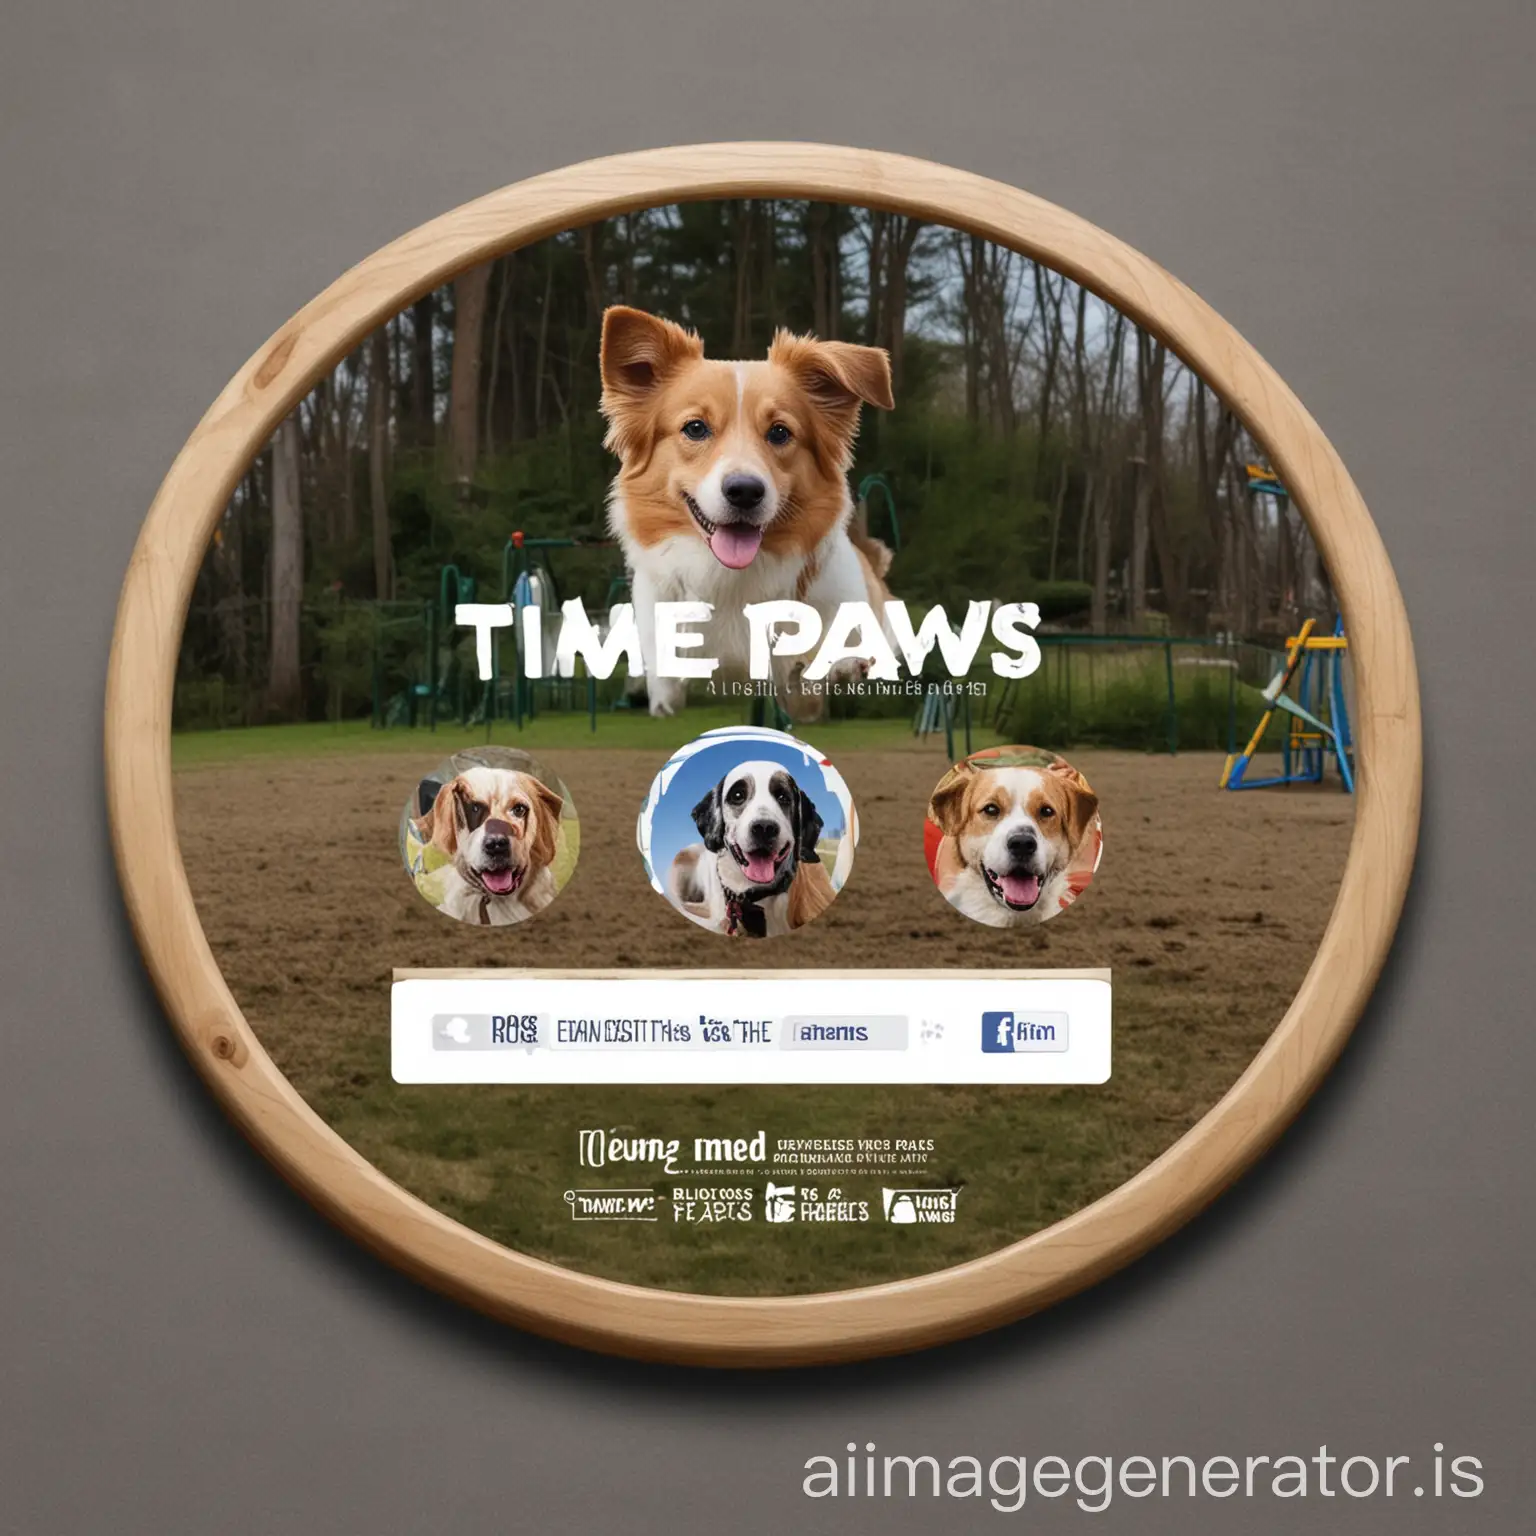 create a facebook round profile frame for our business for dogs playground entitled time paws,